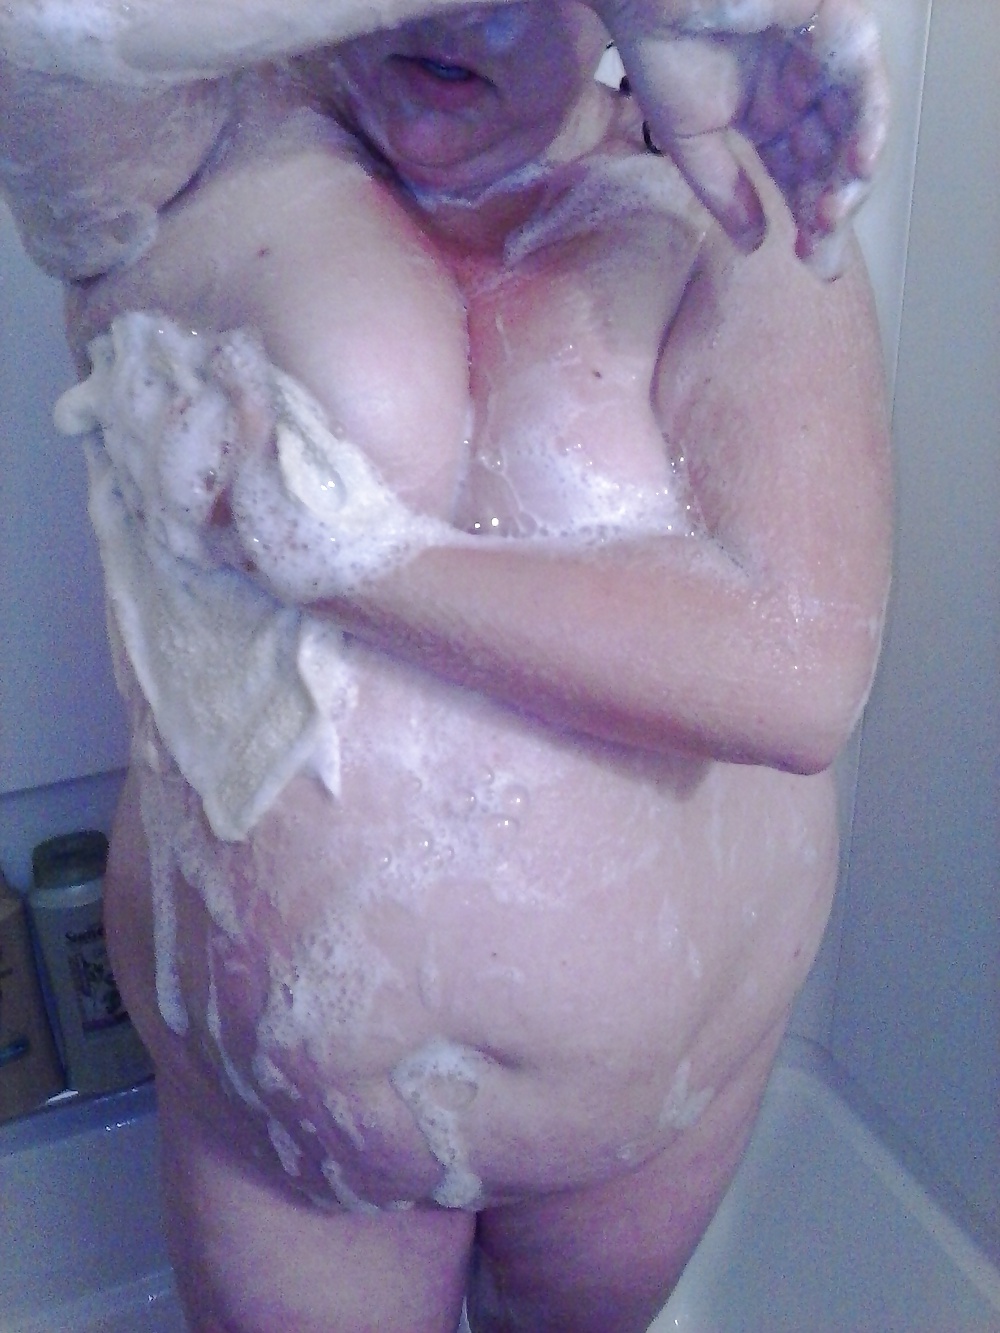 Wife in the shower please comment #30364368